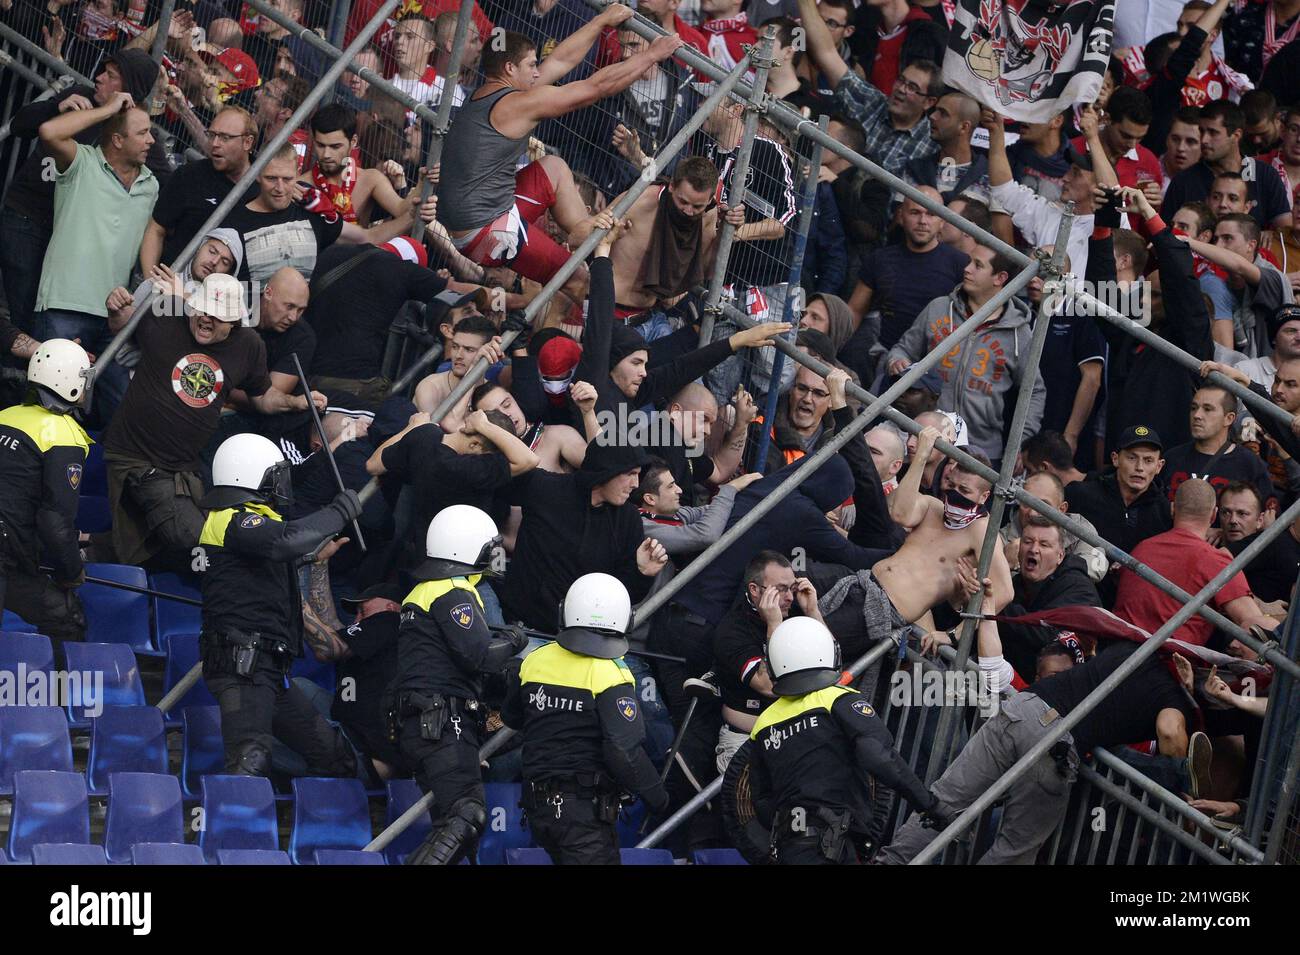 Standard's supporters fight before a soccer game between Dutch club Feyenoord Rotterdam and Belgian first division team Standard de Liege, in the 'De Kuip' stadium in Rotterdam, Netherlands, Thursday 02 October 2014, the second game in the group stage of the UEFA Europa League, in group G. Stock Photo